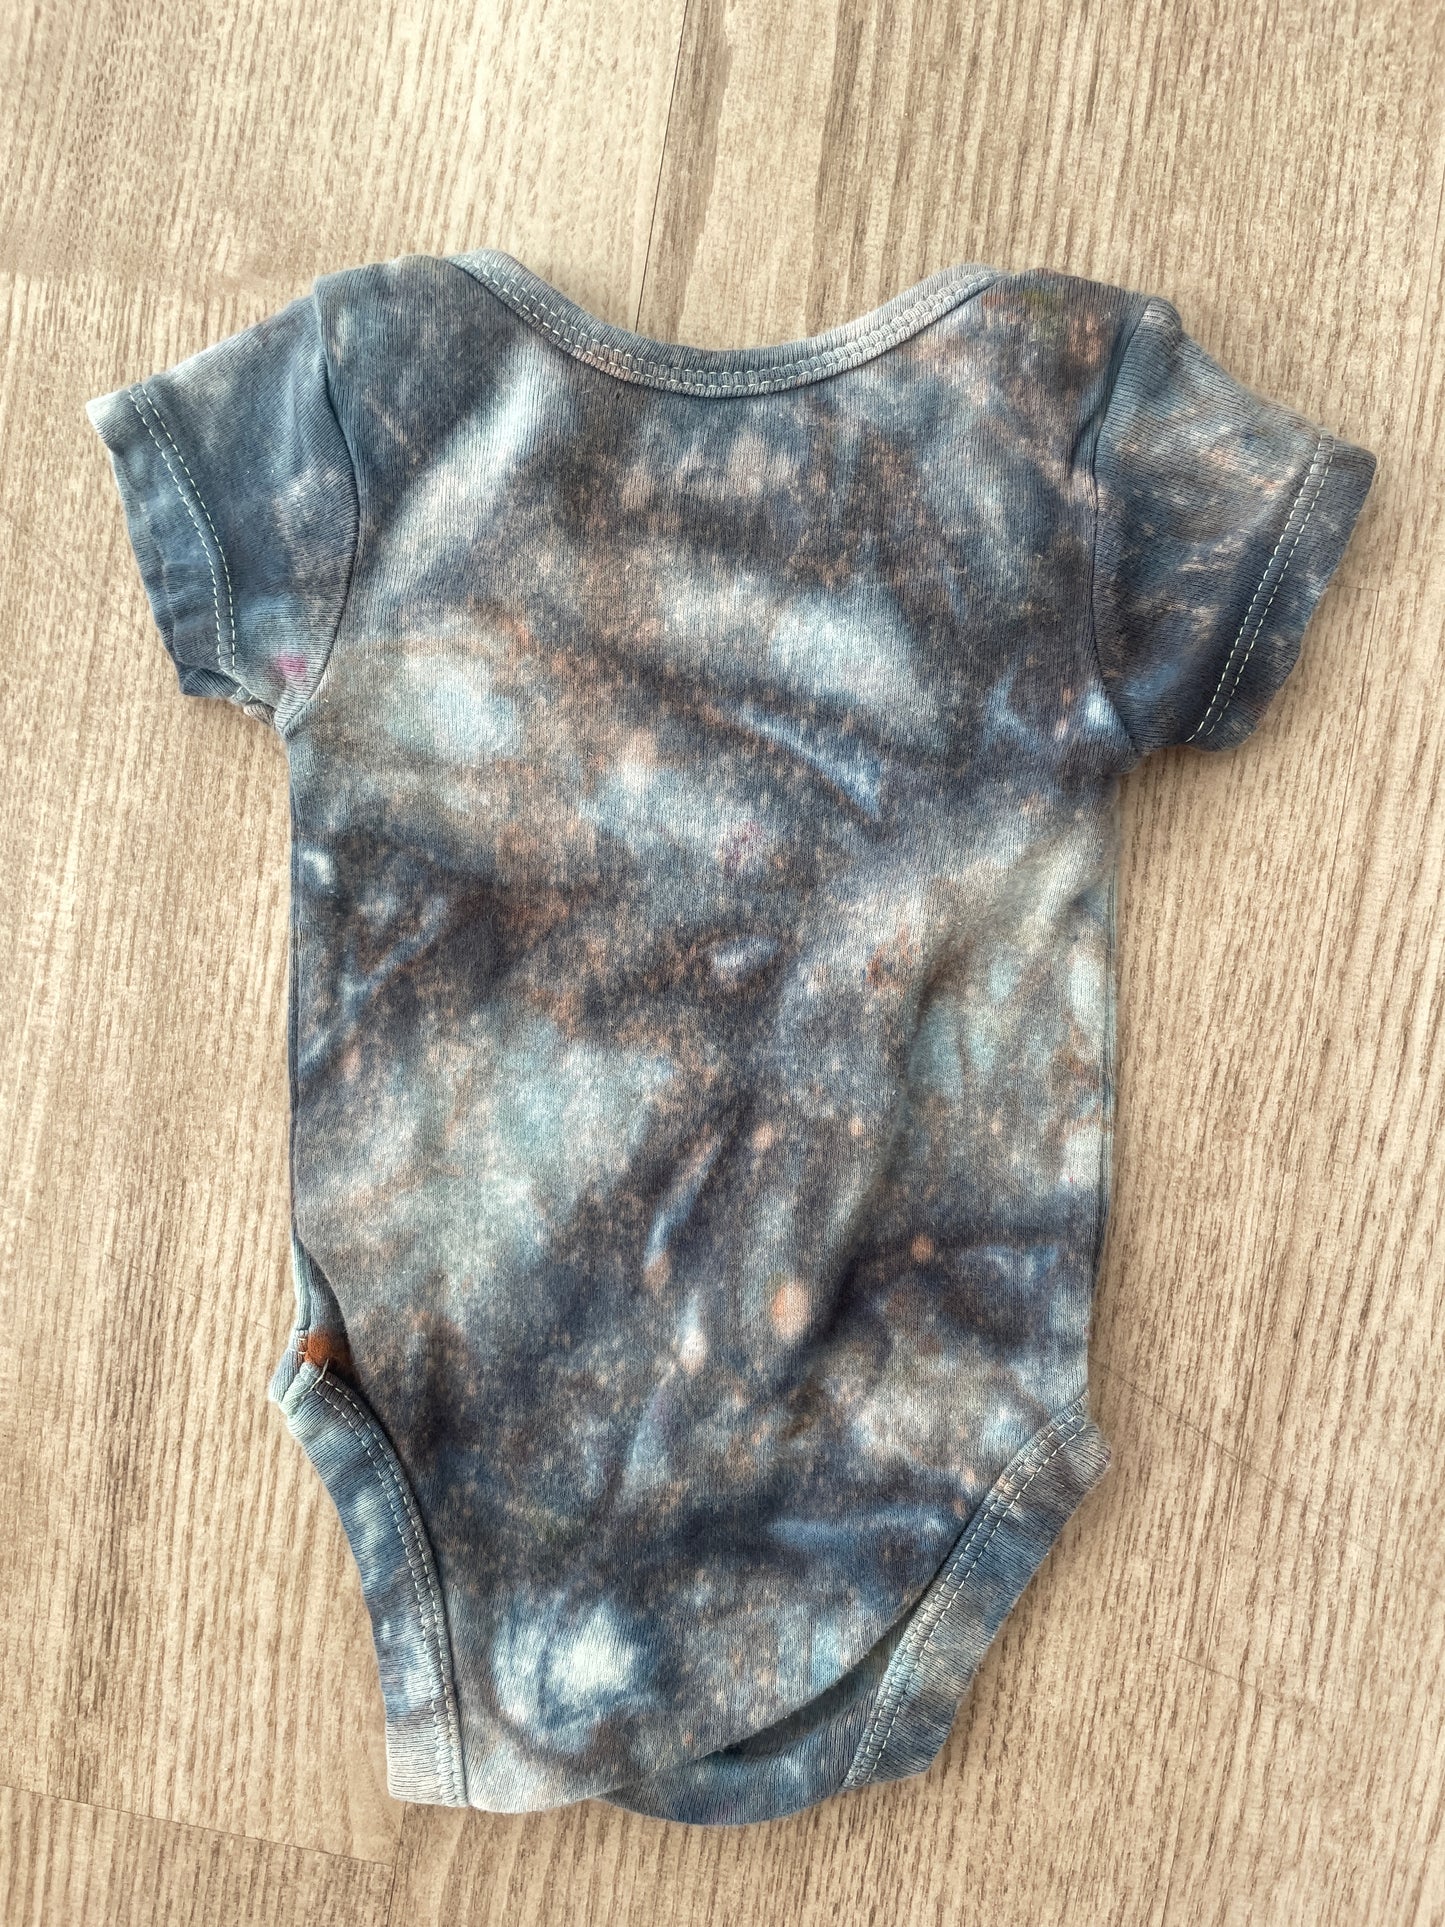 0-3 Months "Adorable" Embroidered Short Sleeve Baby Onesie | Handmade, Upcycled Tie Dye Cotton Onesie | Gray Galaxy Ice Dyed Baby Clothing